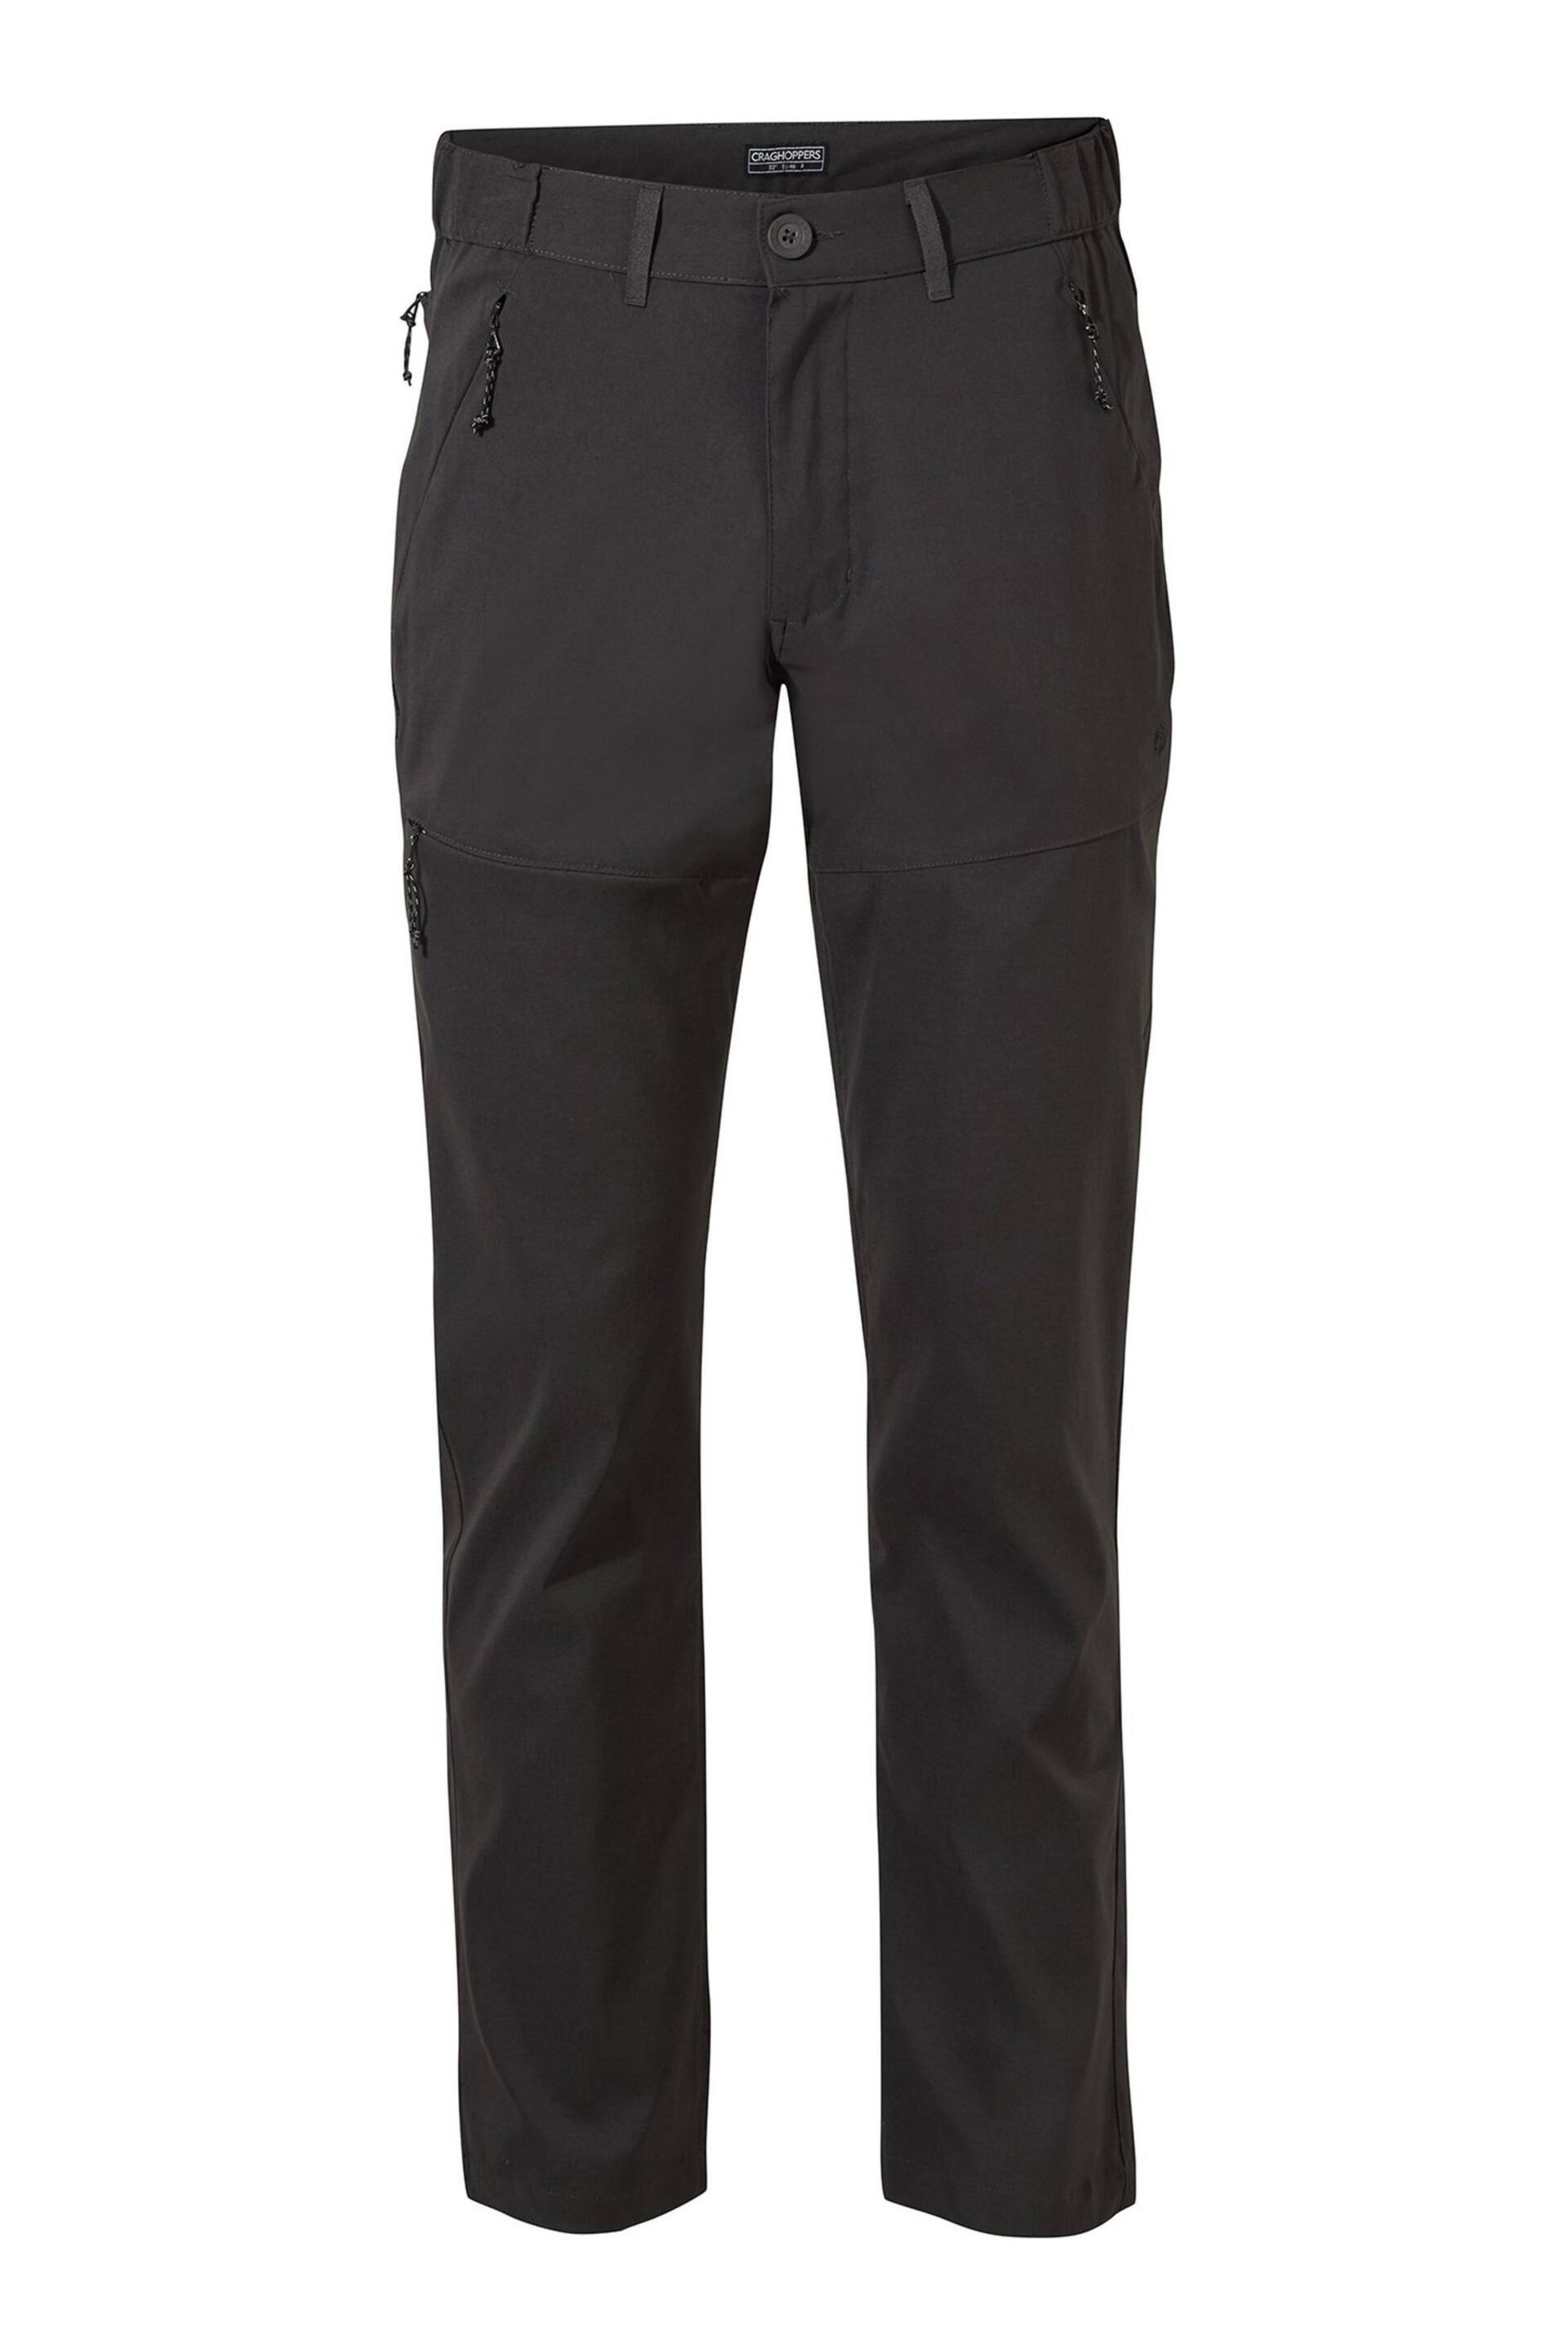 Craghoppers Grey Kiwi Pro Trousers - Image 5 of 5